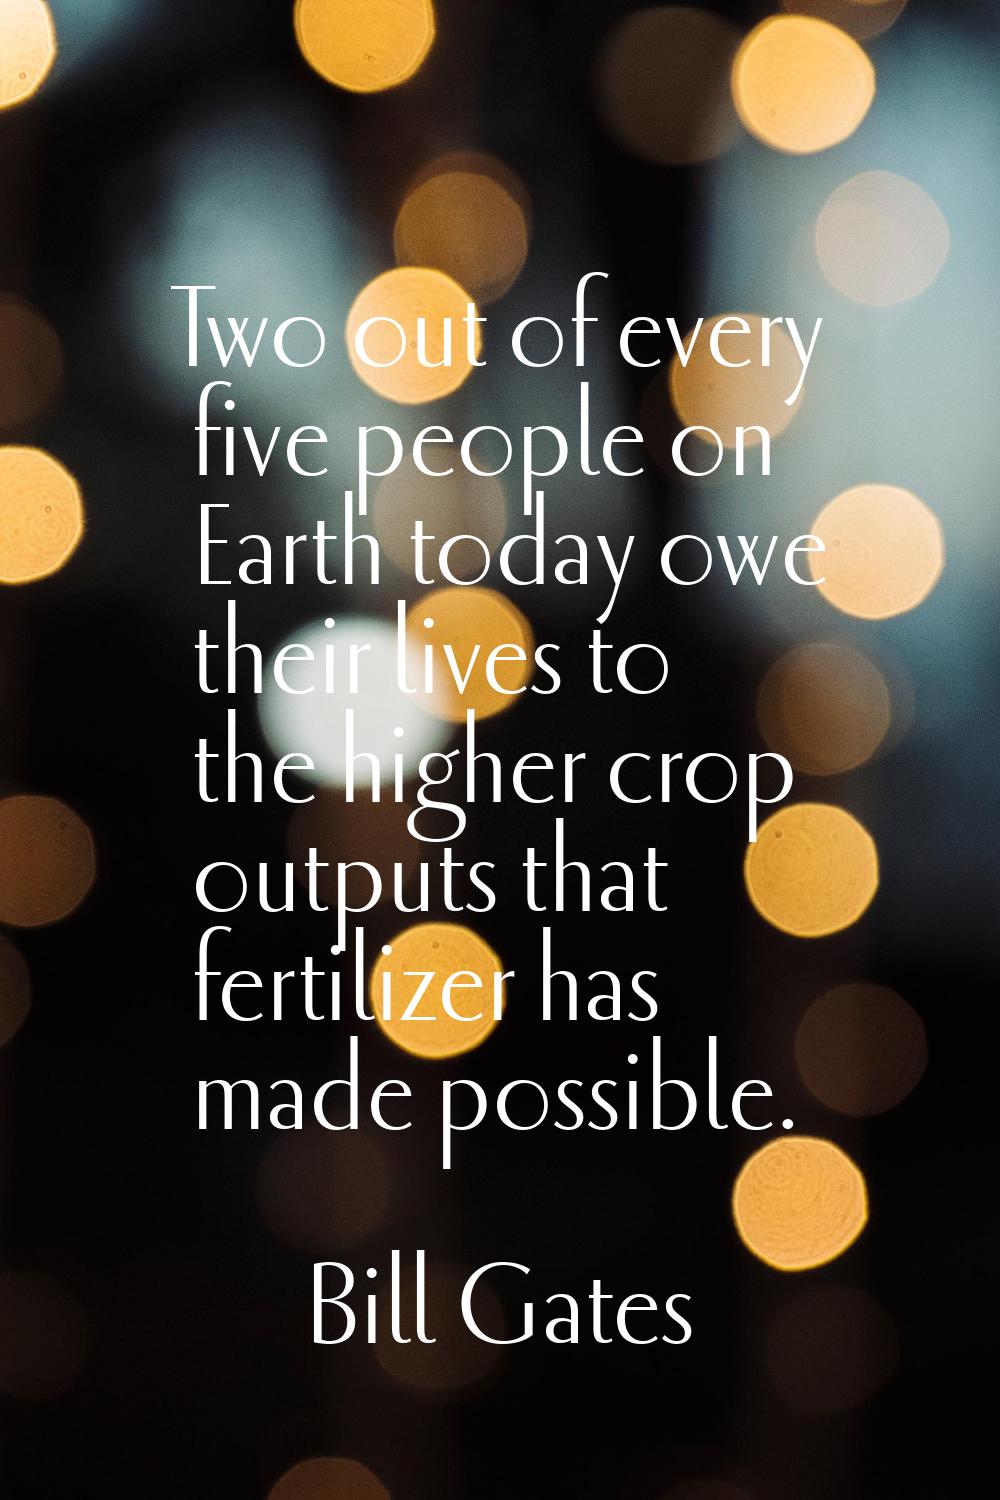 Two out of every five people on Earth today owe their lives to the higher crop outputs that fertili